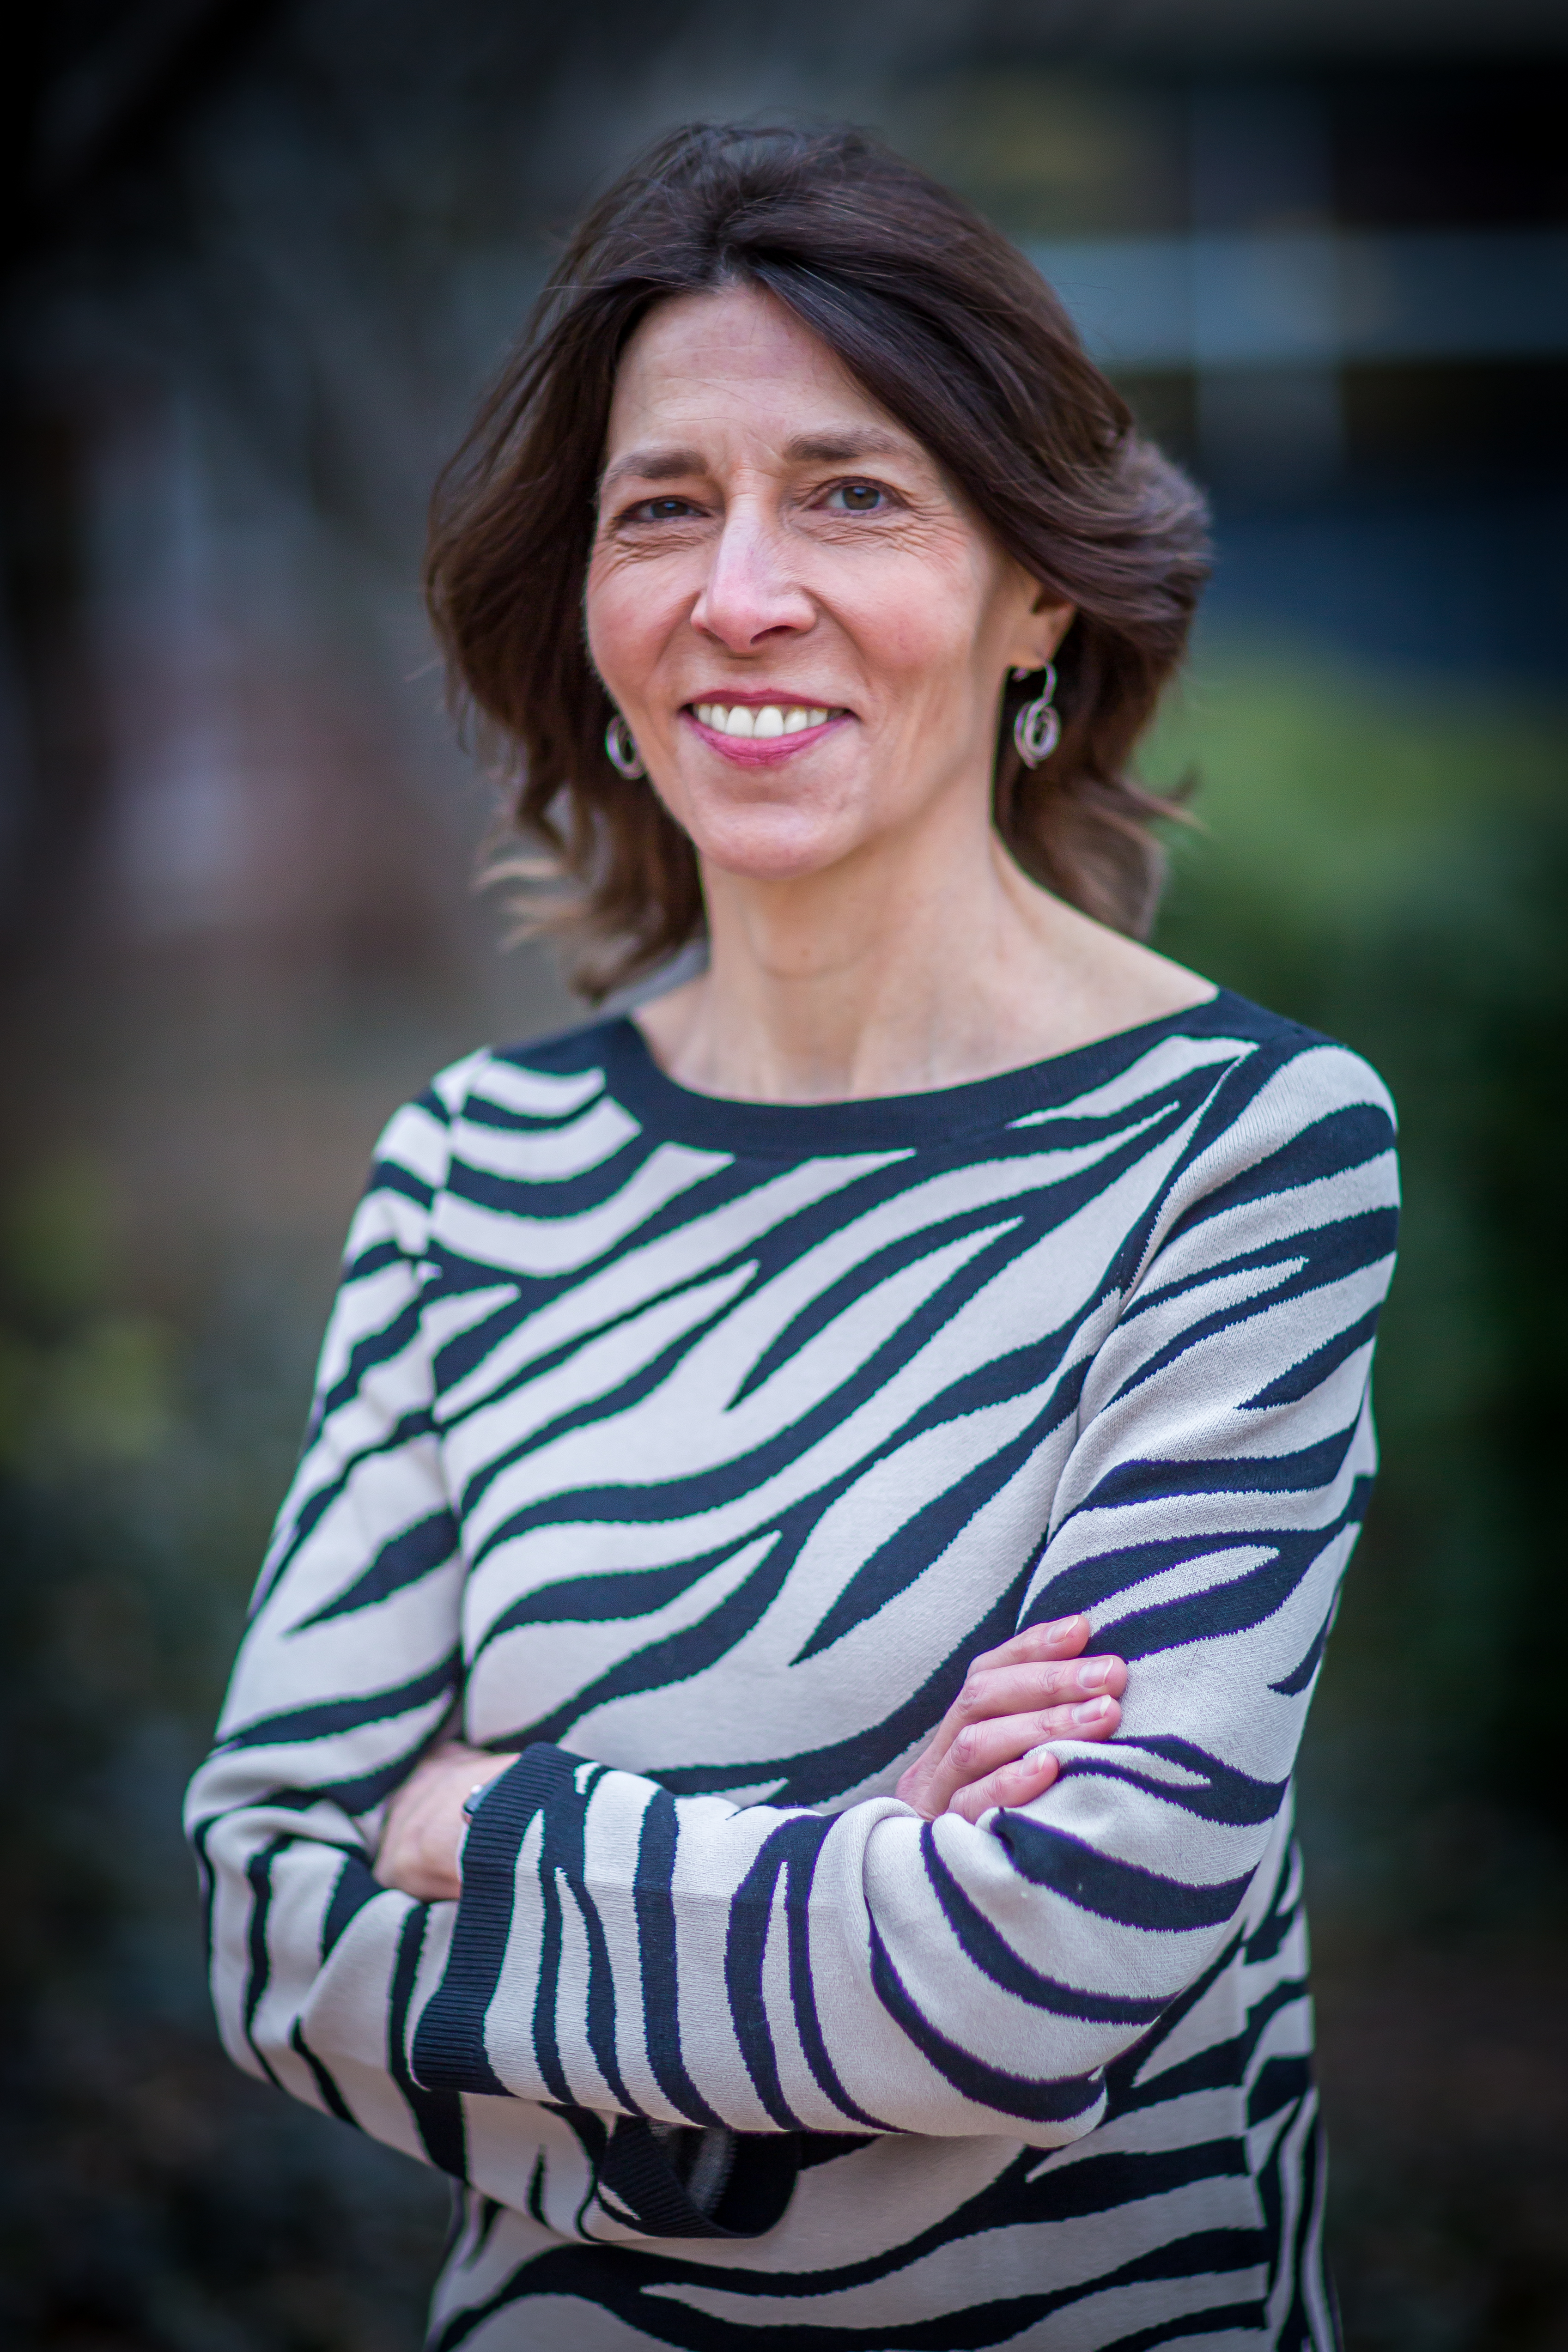 Rachel Carnell appointed Dean of the Jack, Joseph, and Morton Mandel Honors College